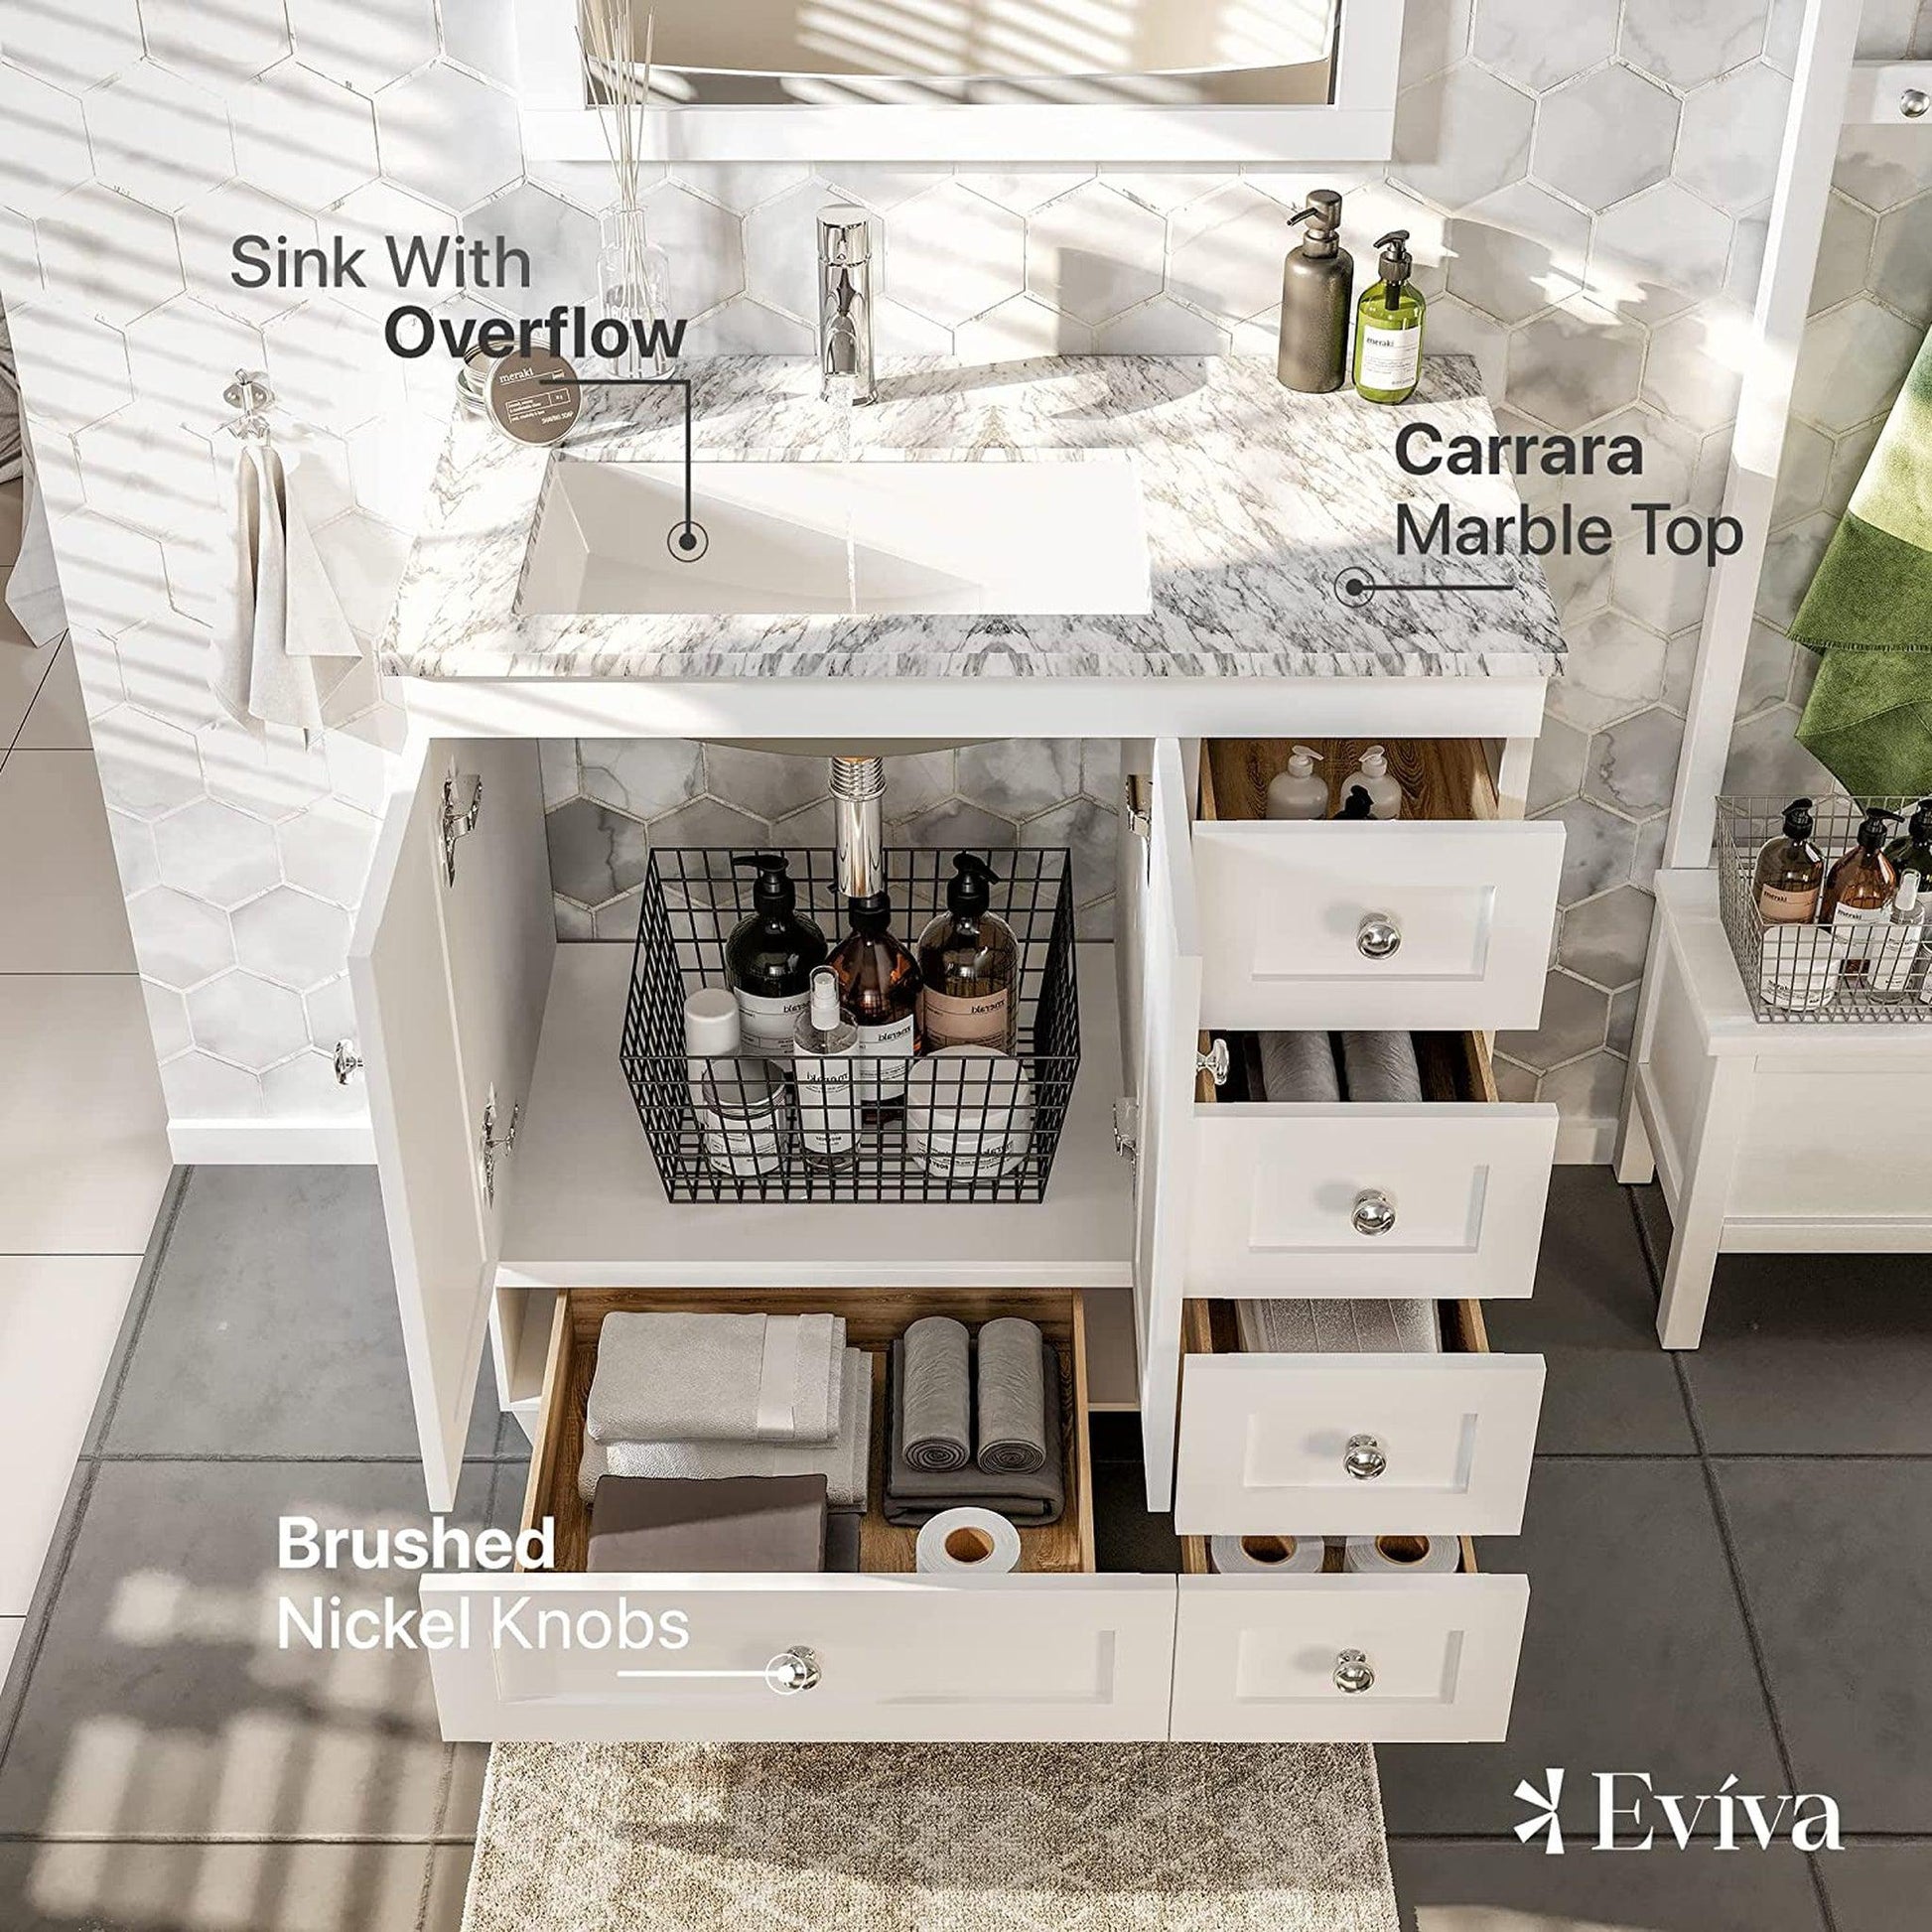 Eviva Happy 30" x 34" White Freestanding Bathroom Vanity With White Carrara Marble Top and Single Undermount Porcelain Sink